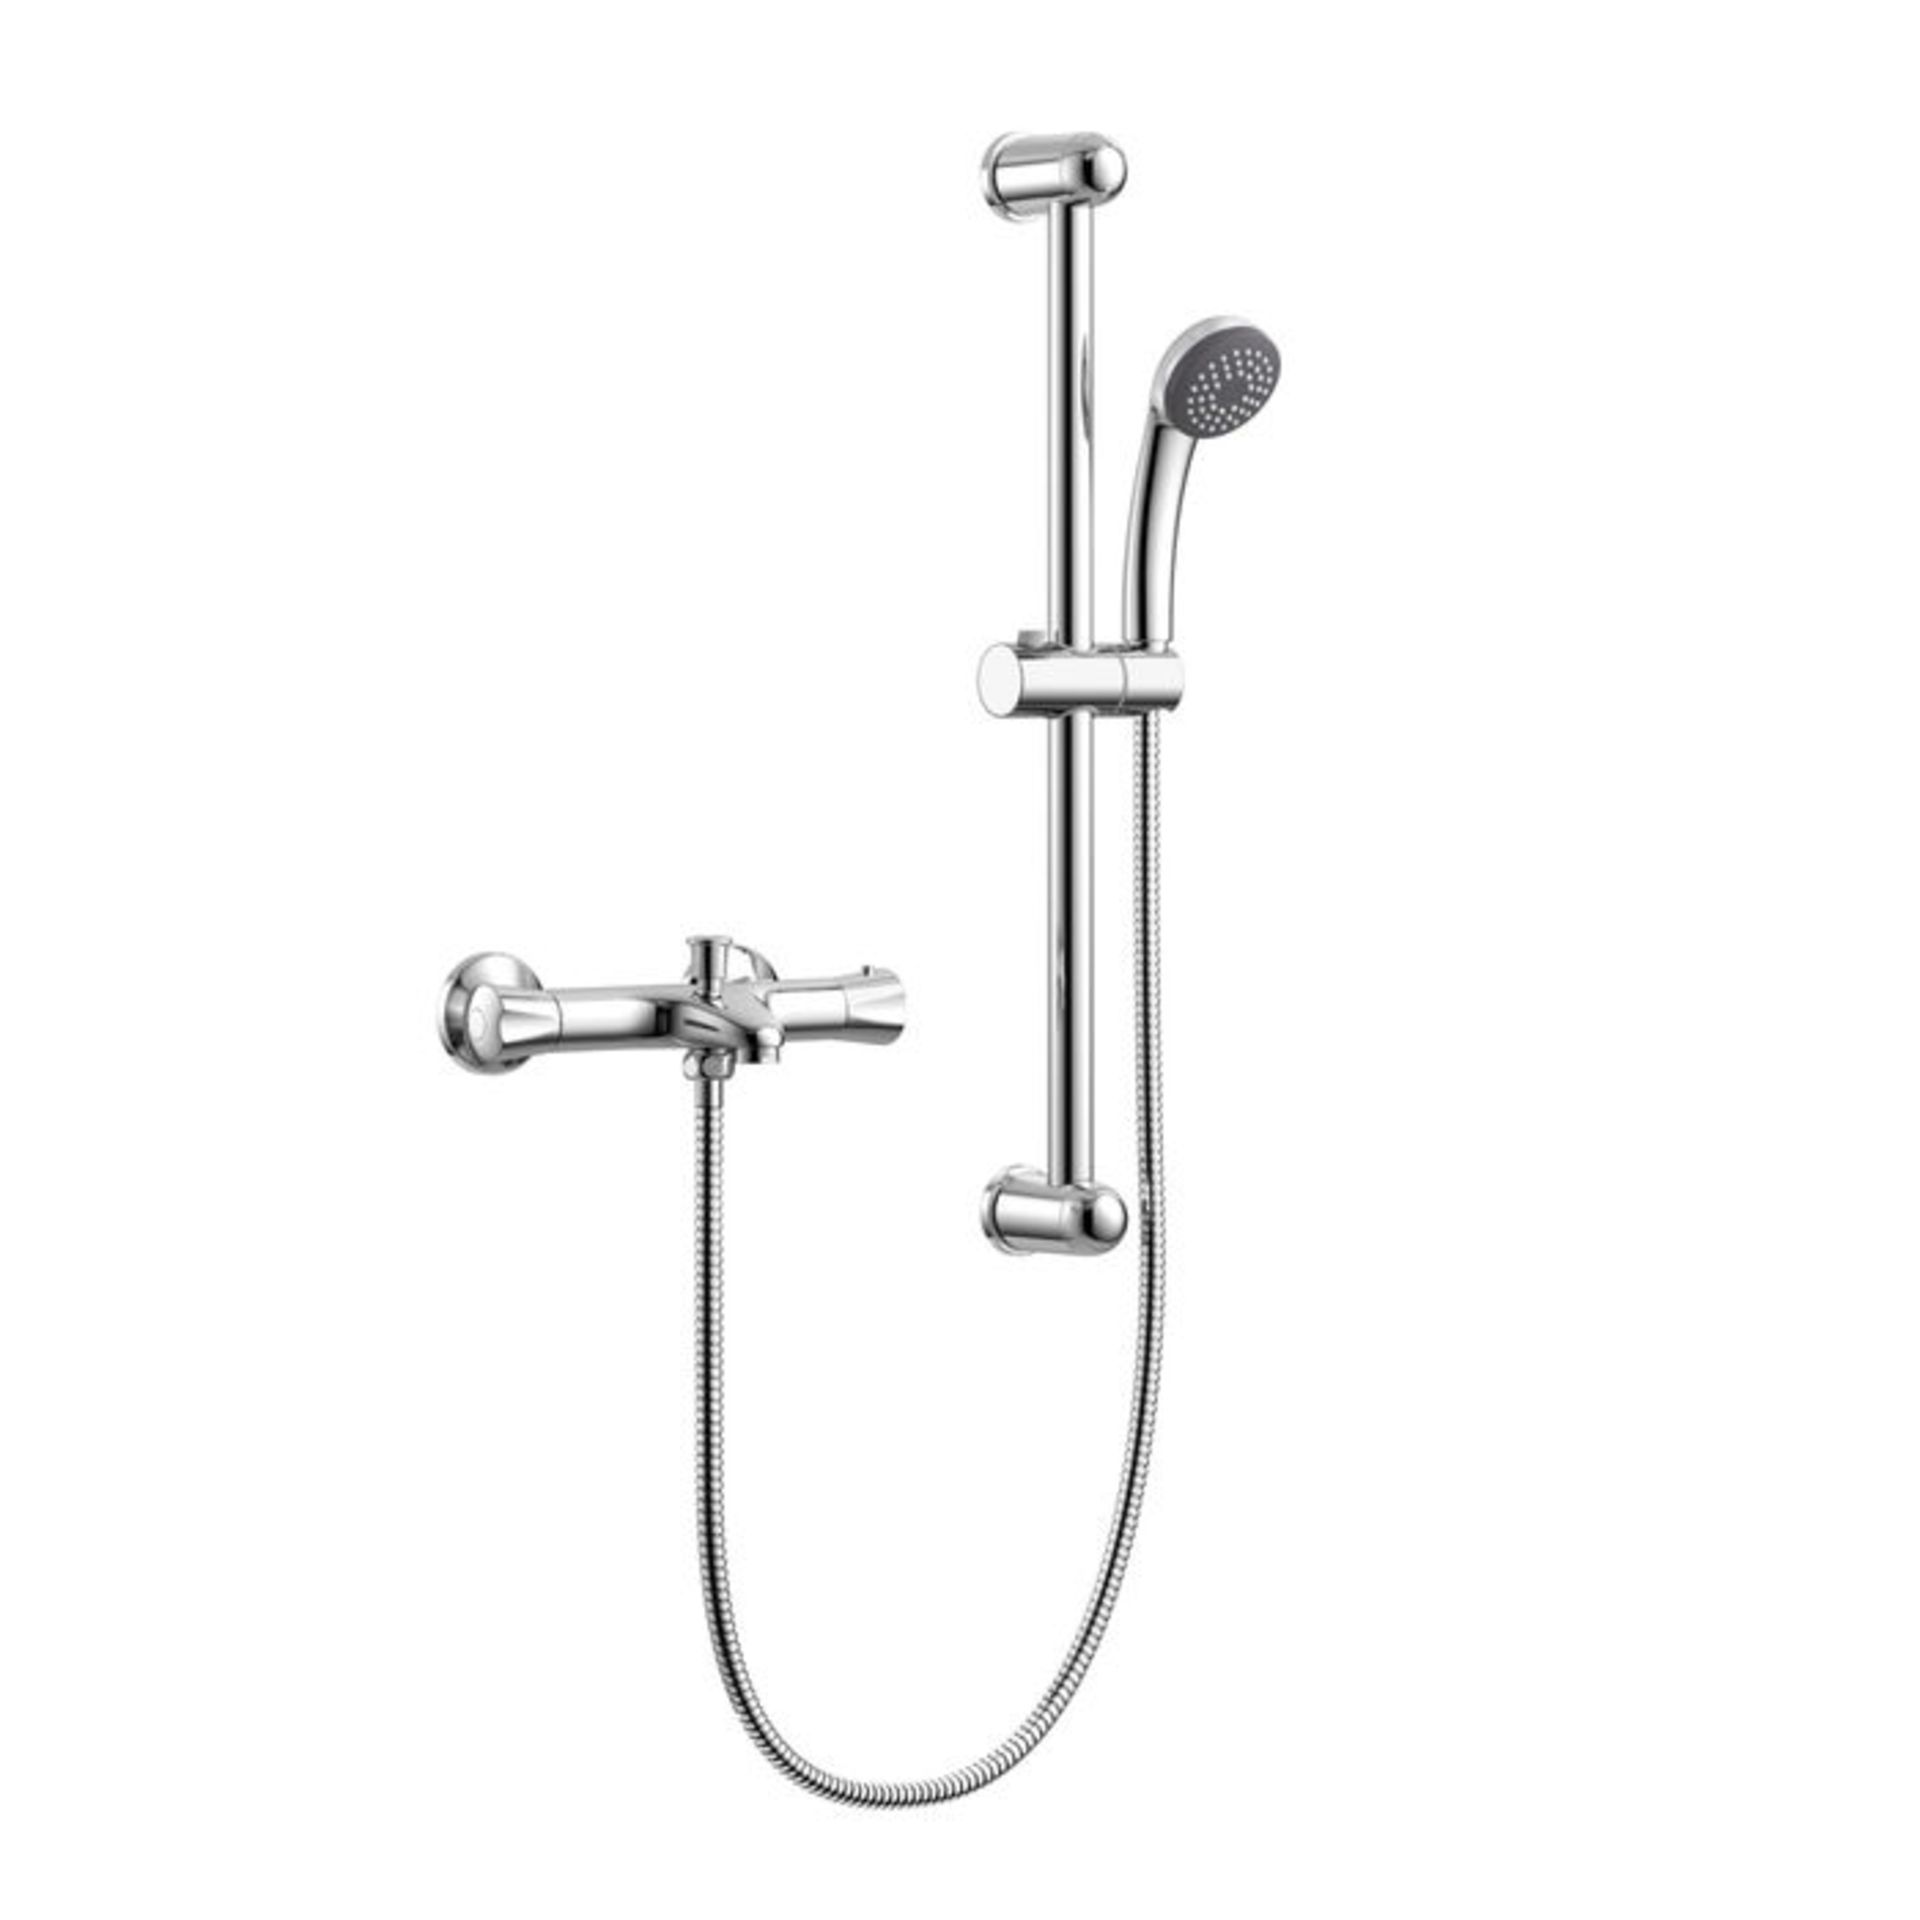 (CT76) Round Thermostatic Bar Mixer Kit with Bath Filler Considered function with our detachable - Bild 2 aus 3